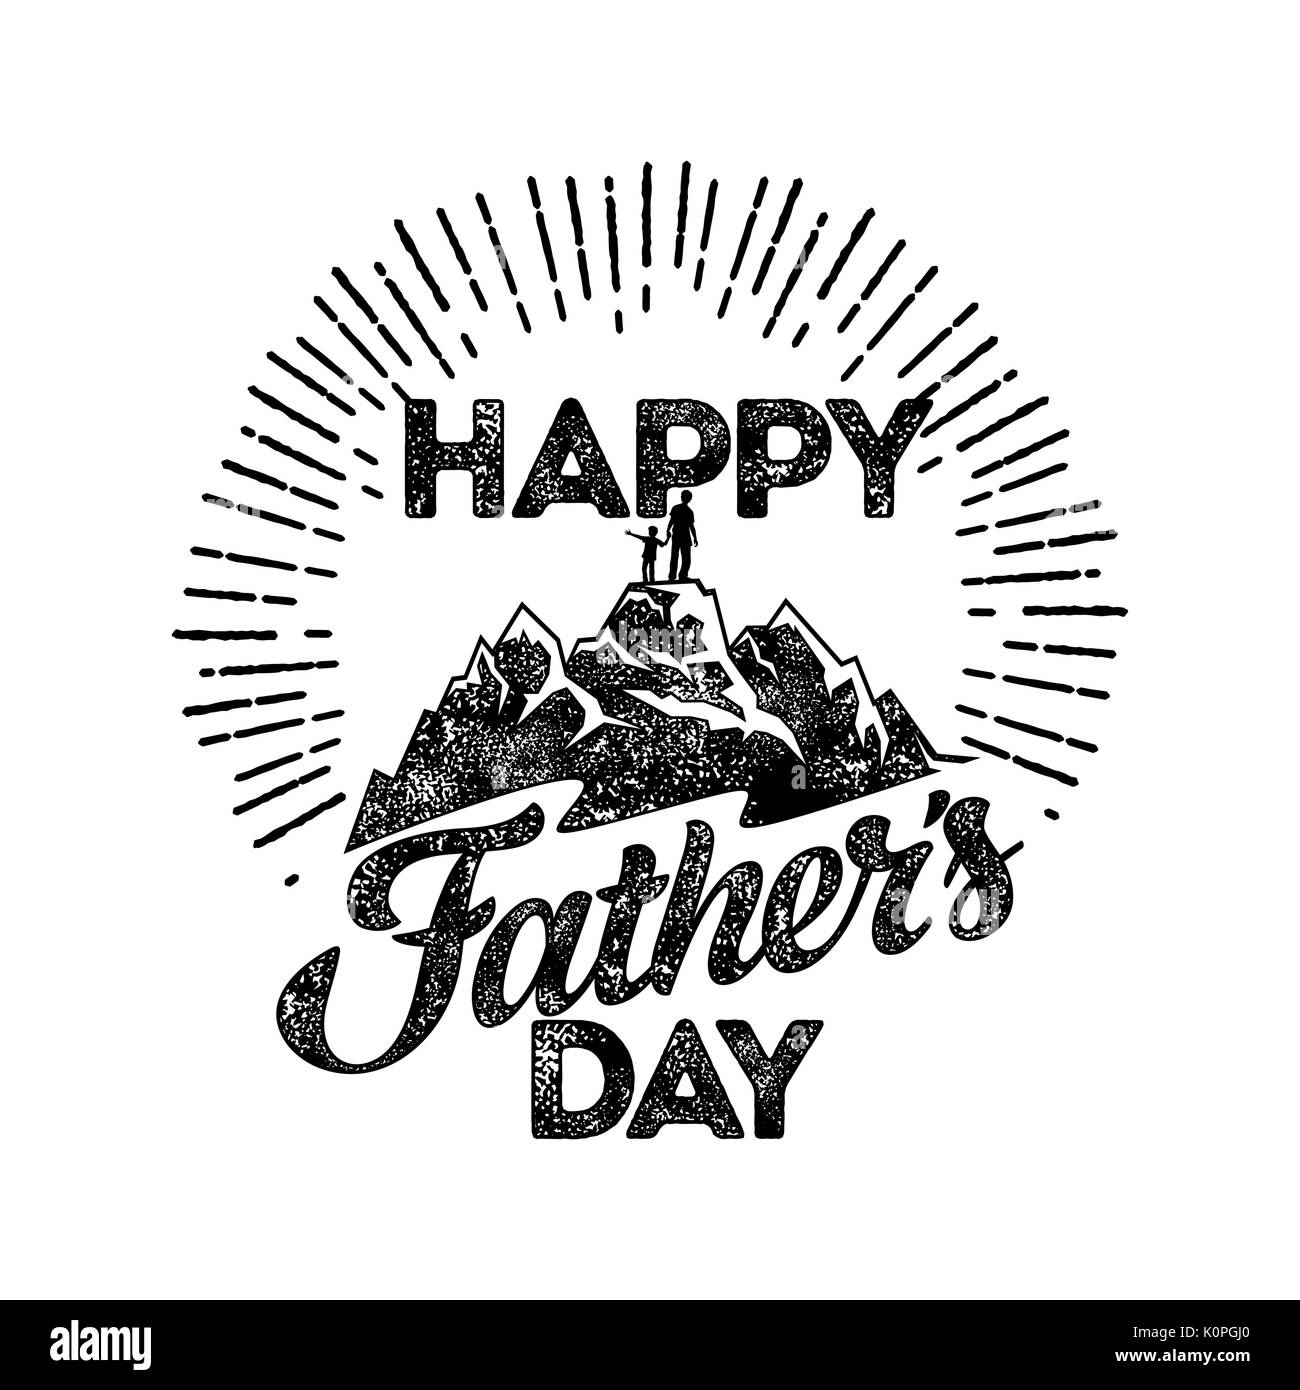 Typography and lettering with design elements and silhouettes for a happy father's day Stock Vector